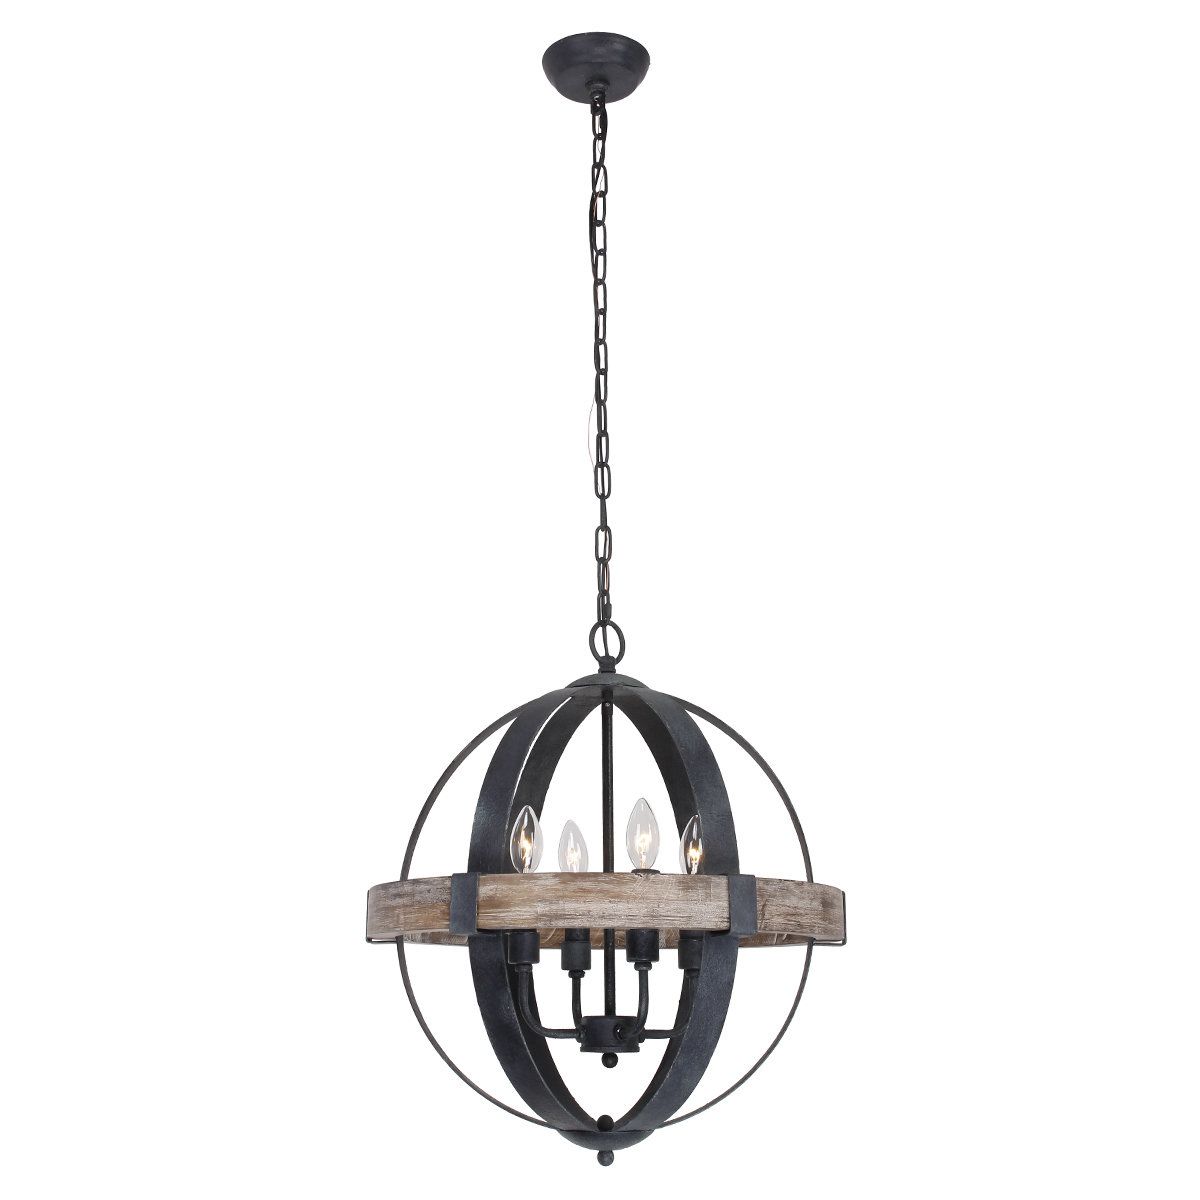 Landwehr 4 Light Chandelier Intended For Donna 4 Light Globe Chandeliers (View 13 of 30)